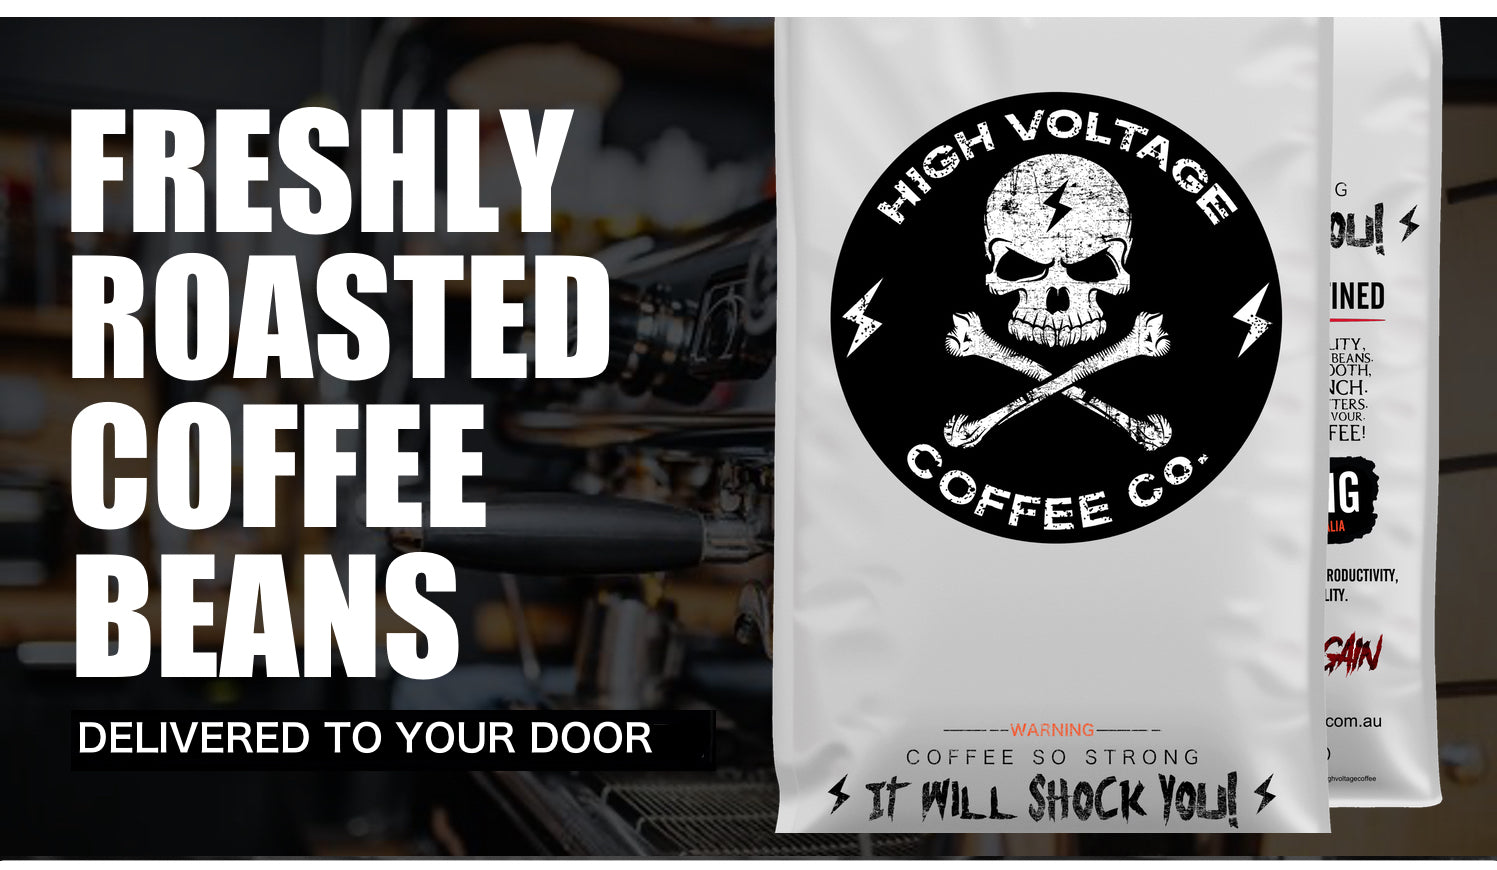 Australia's #1 Strong Coffee ☕ Delivered Fast & Fresh to your doorstep no matter where you reside. FREE Shipping on orders $75 and over. Coffee Beans Near Me, Best Rated Coffee Beans, Best Coffee Beans